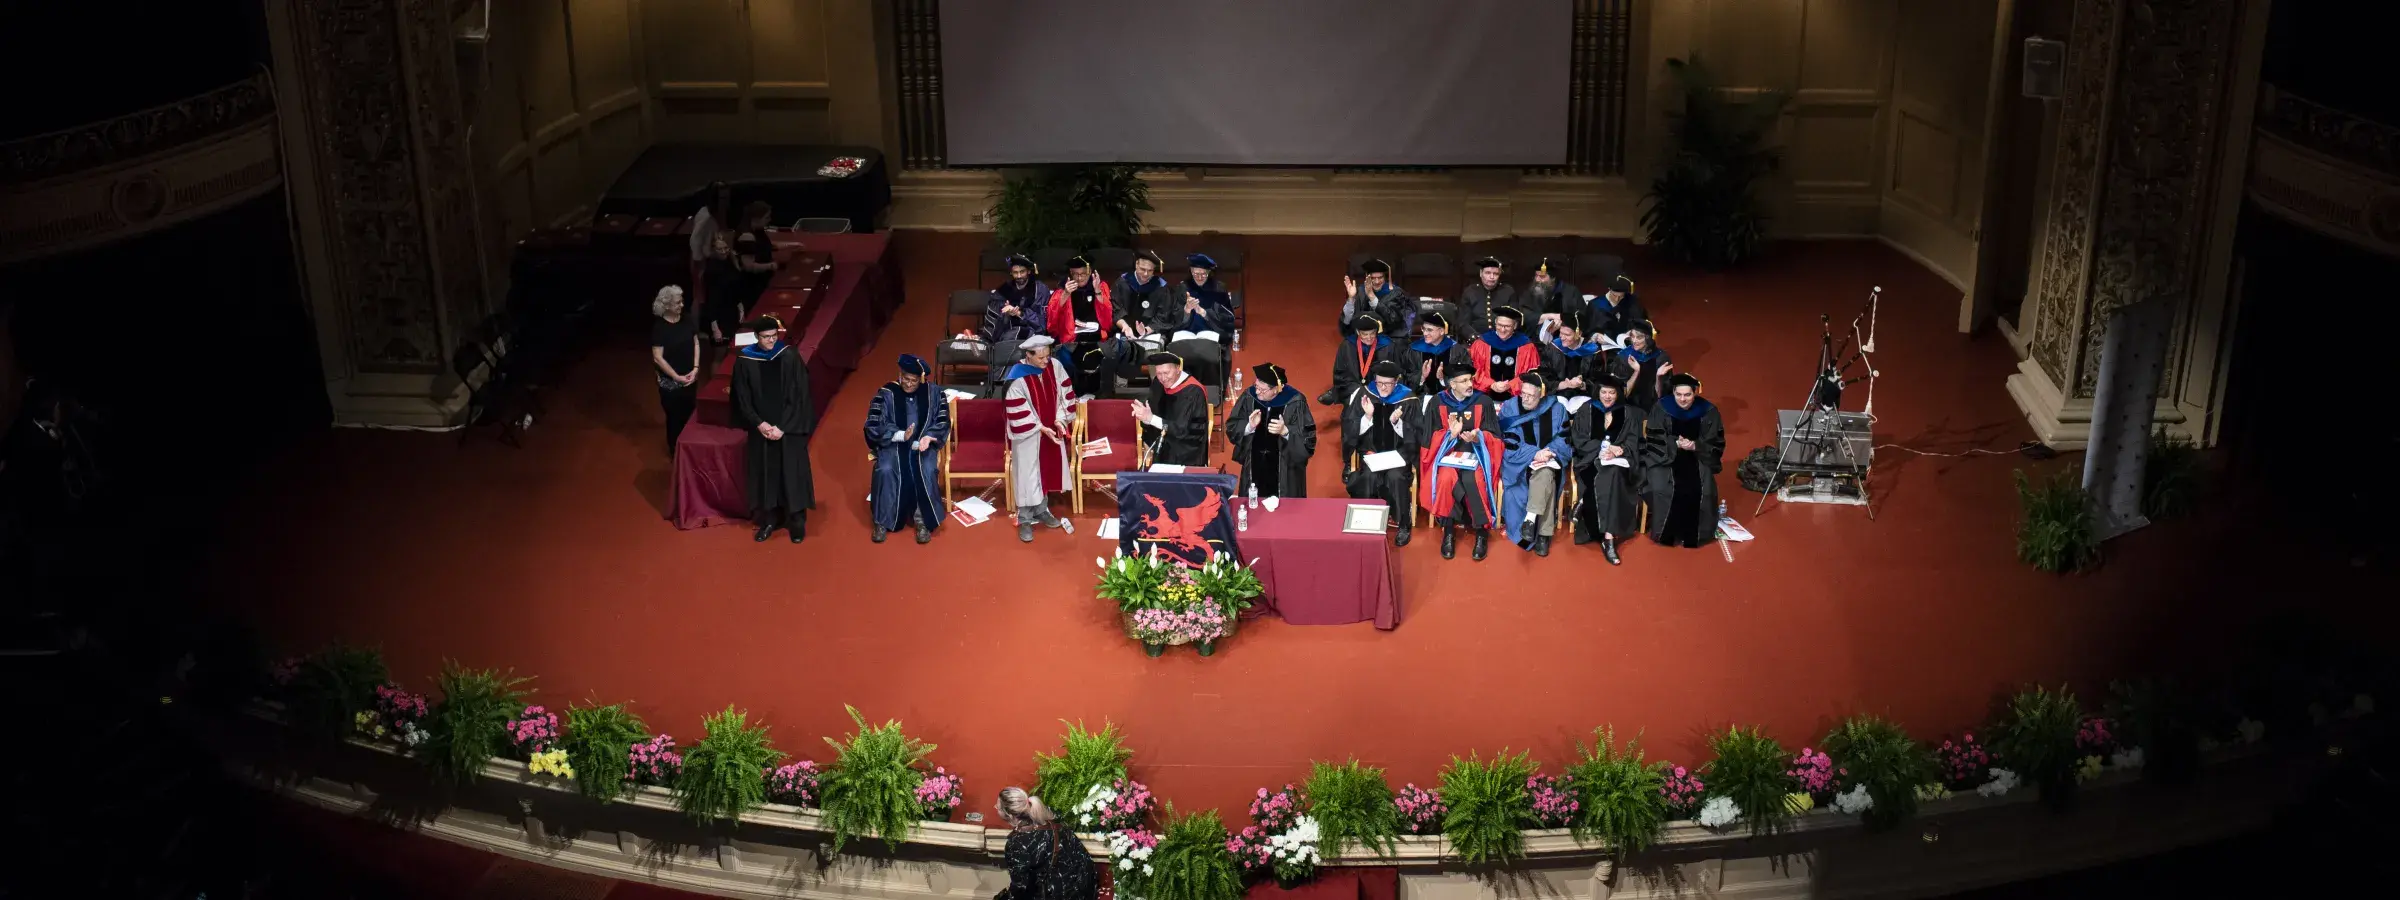 SCS Faculty on stage at the Carnegie during commencement